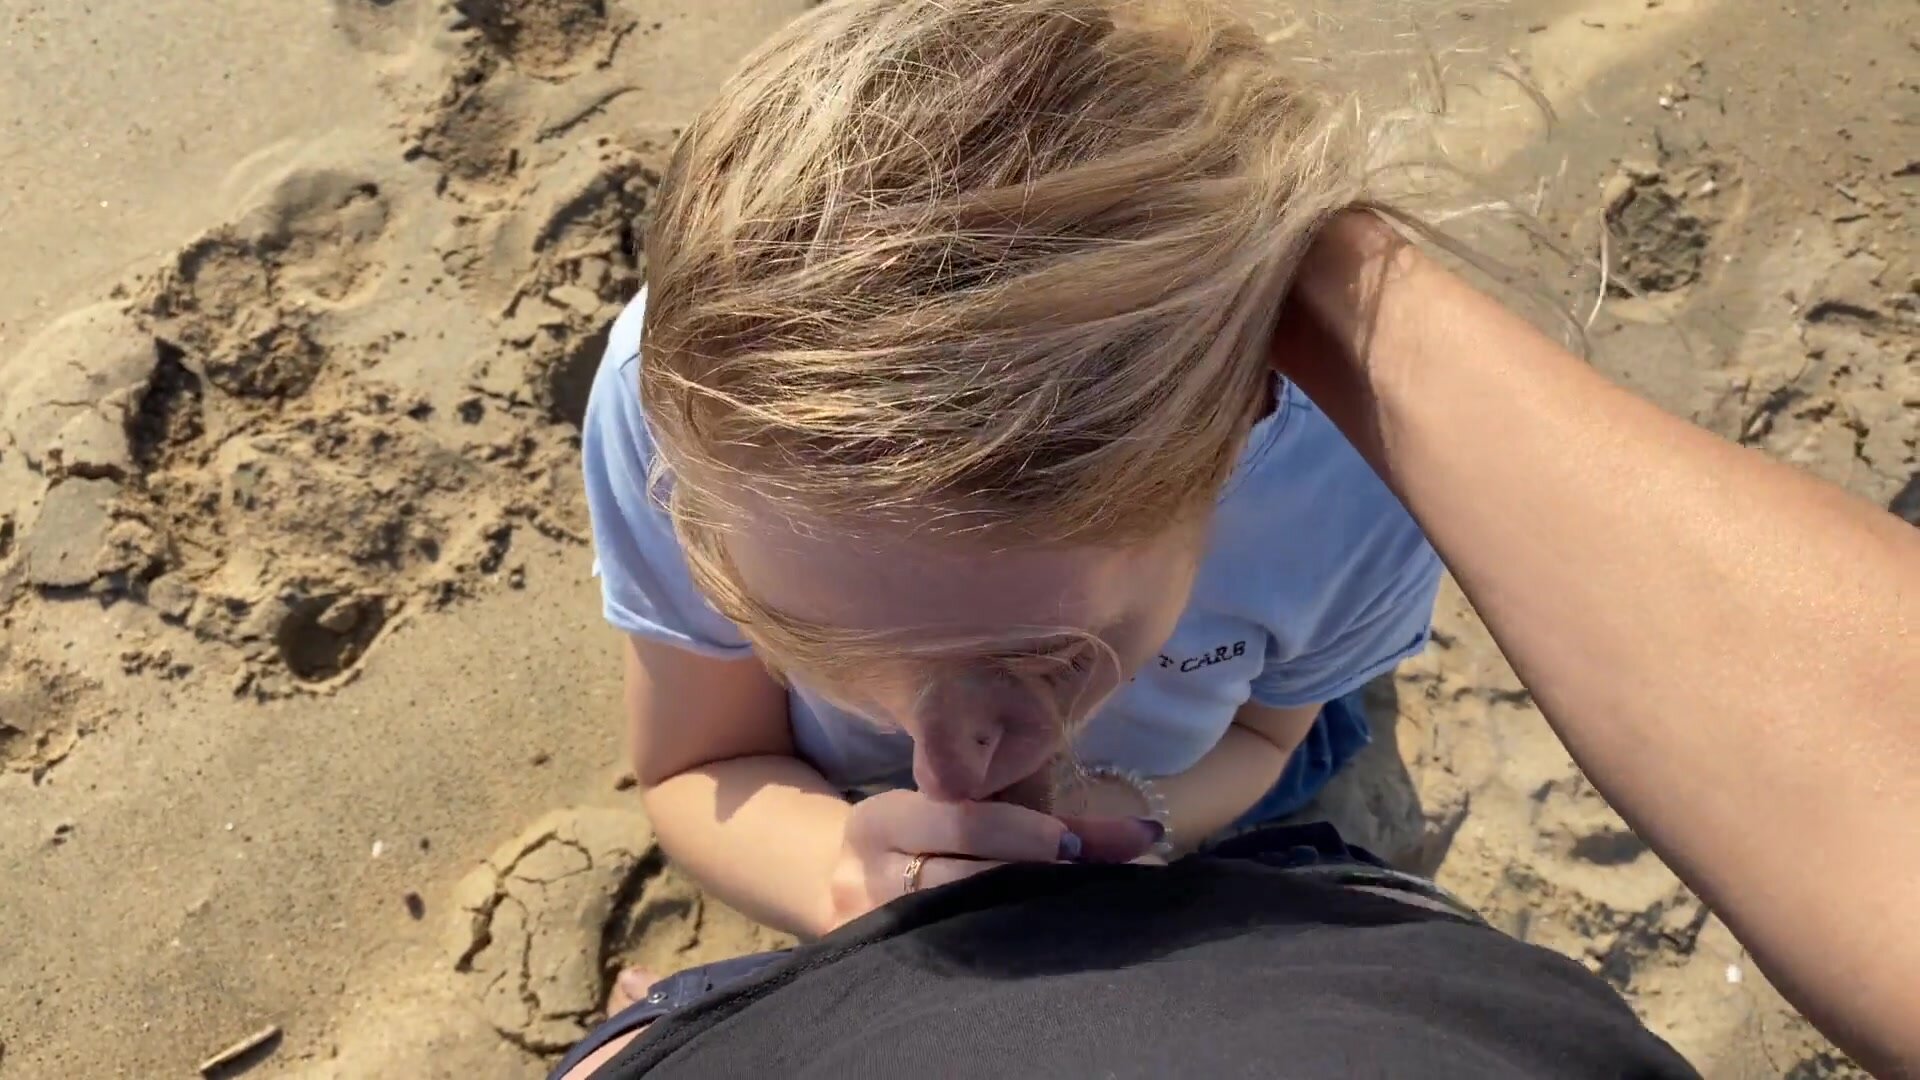 Angelic oral sex at the beach with excited blonde pic